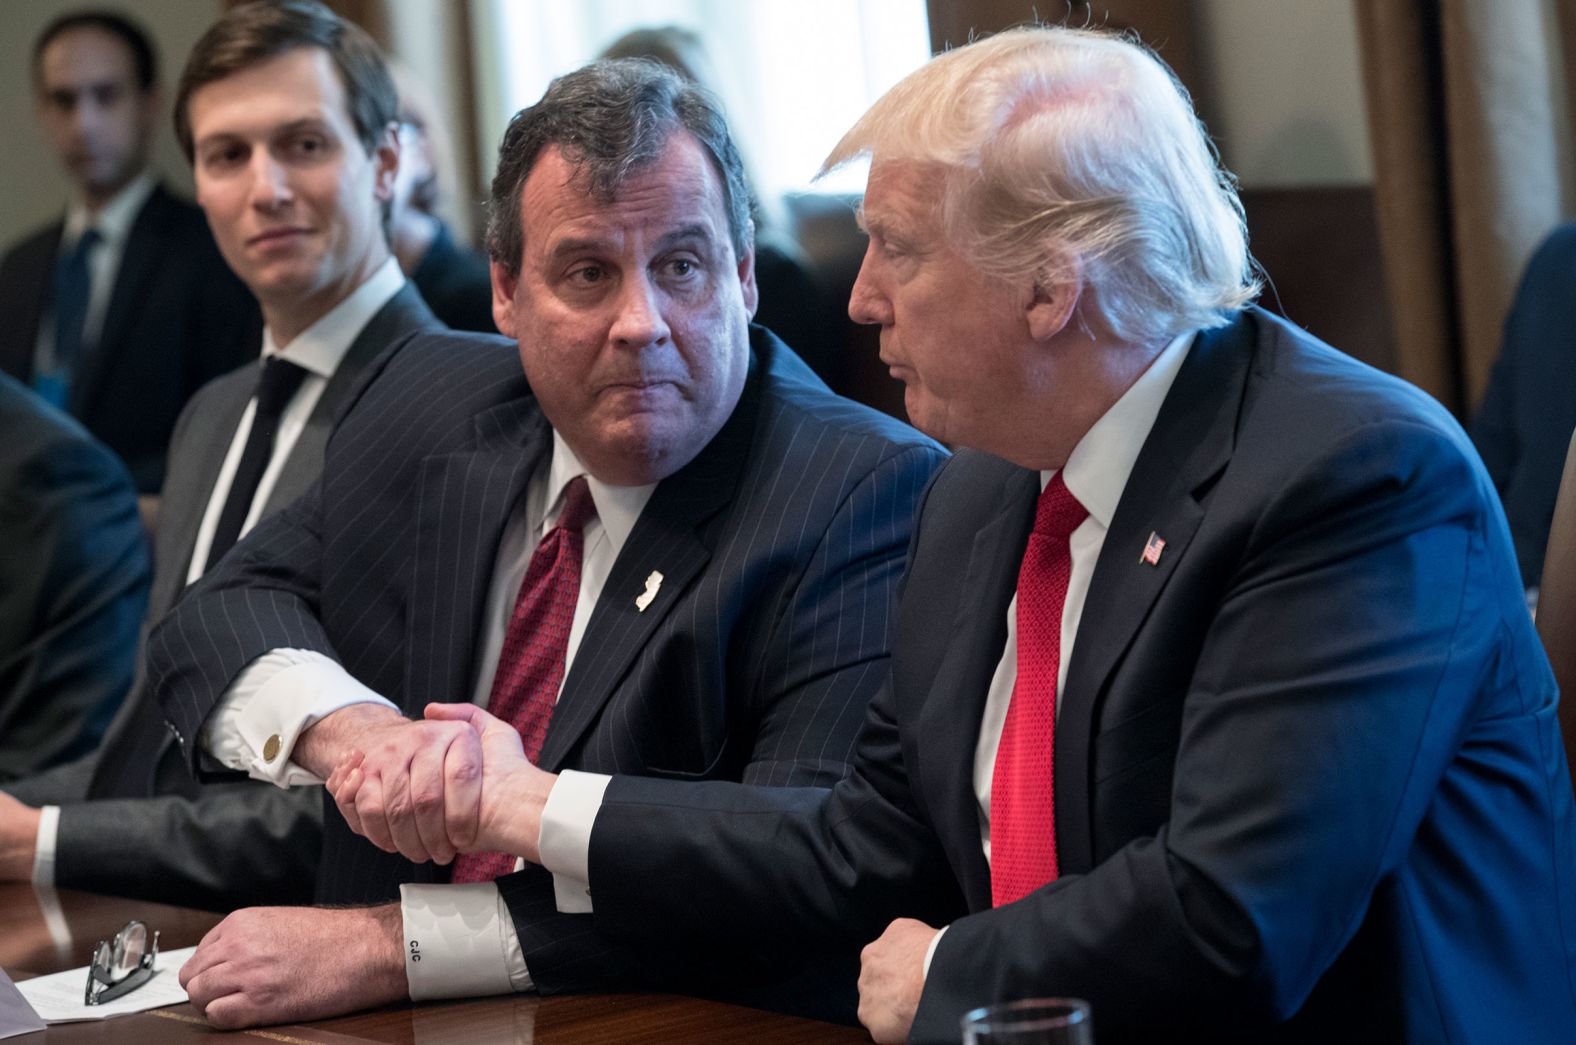 Christie shakes hands with President Trump at the White House in March 2017. Trump announced that Christie <a href="index.php?page=&url=http%3A%2F%2Fwww.cnn.com%2F2017%2F03%2F29%2Fhealth%2Fchristie-opioid-trump-appointment%2F" target="_blank">would take on an advisory role</a> to help figure out ways the administration can fight the country's opioid epidemic.